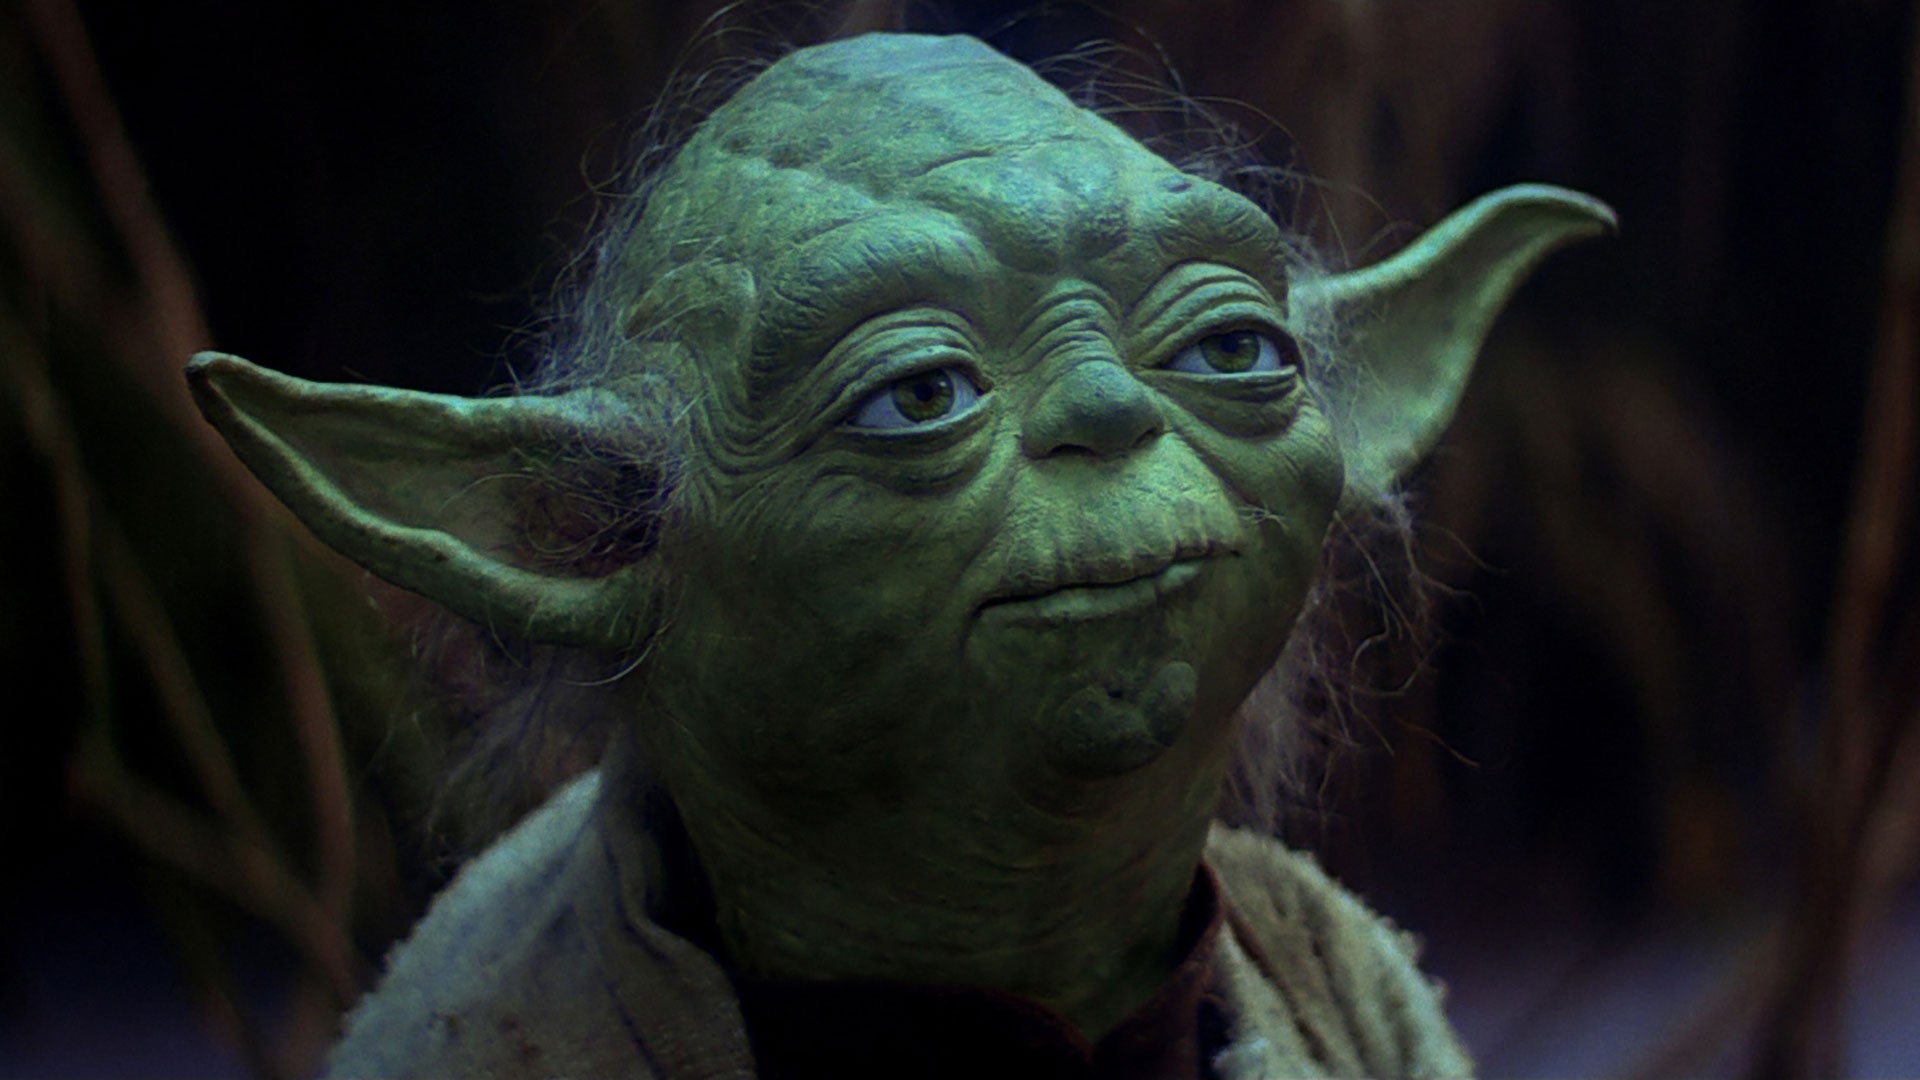 Star Wars Yoda Nearly Almost In Key The Force Awakens Scene The